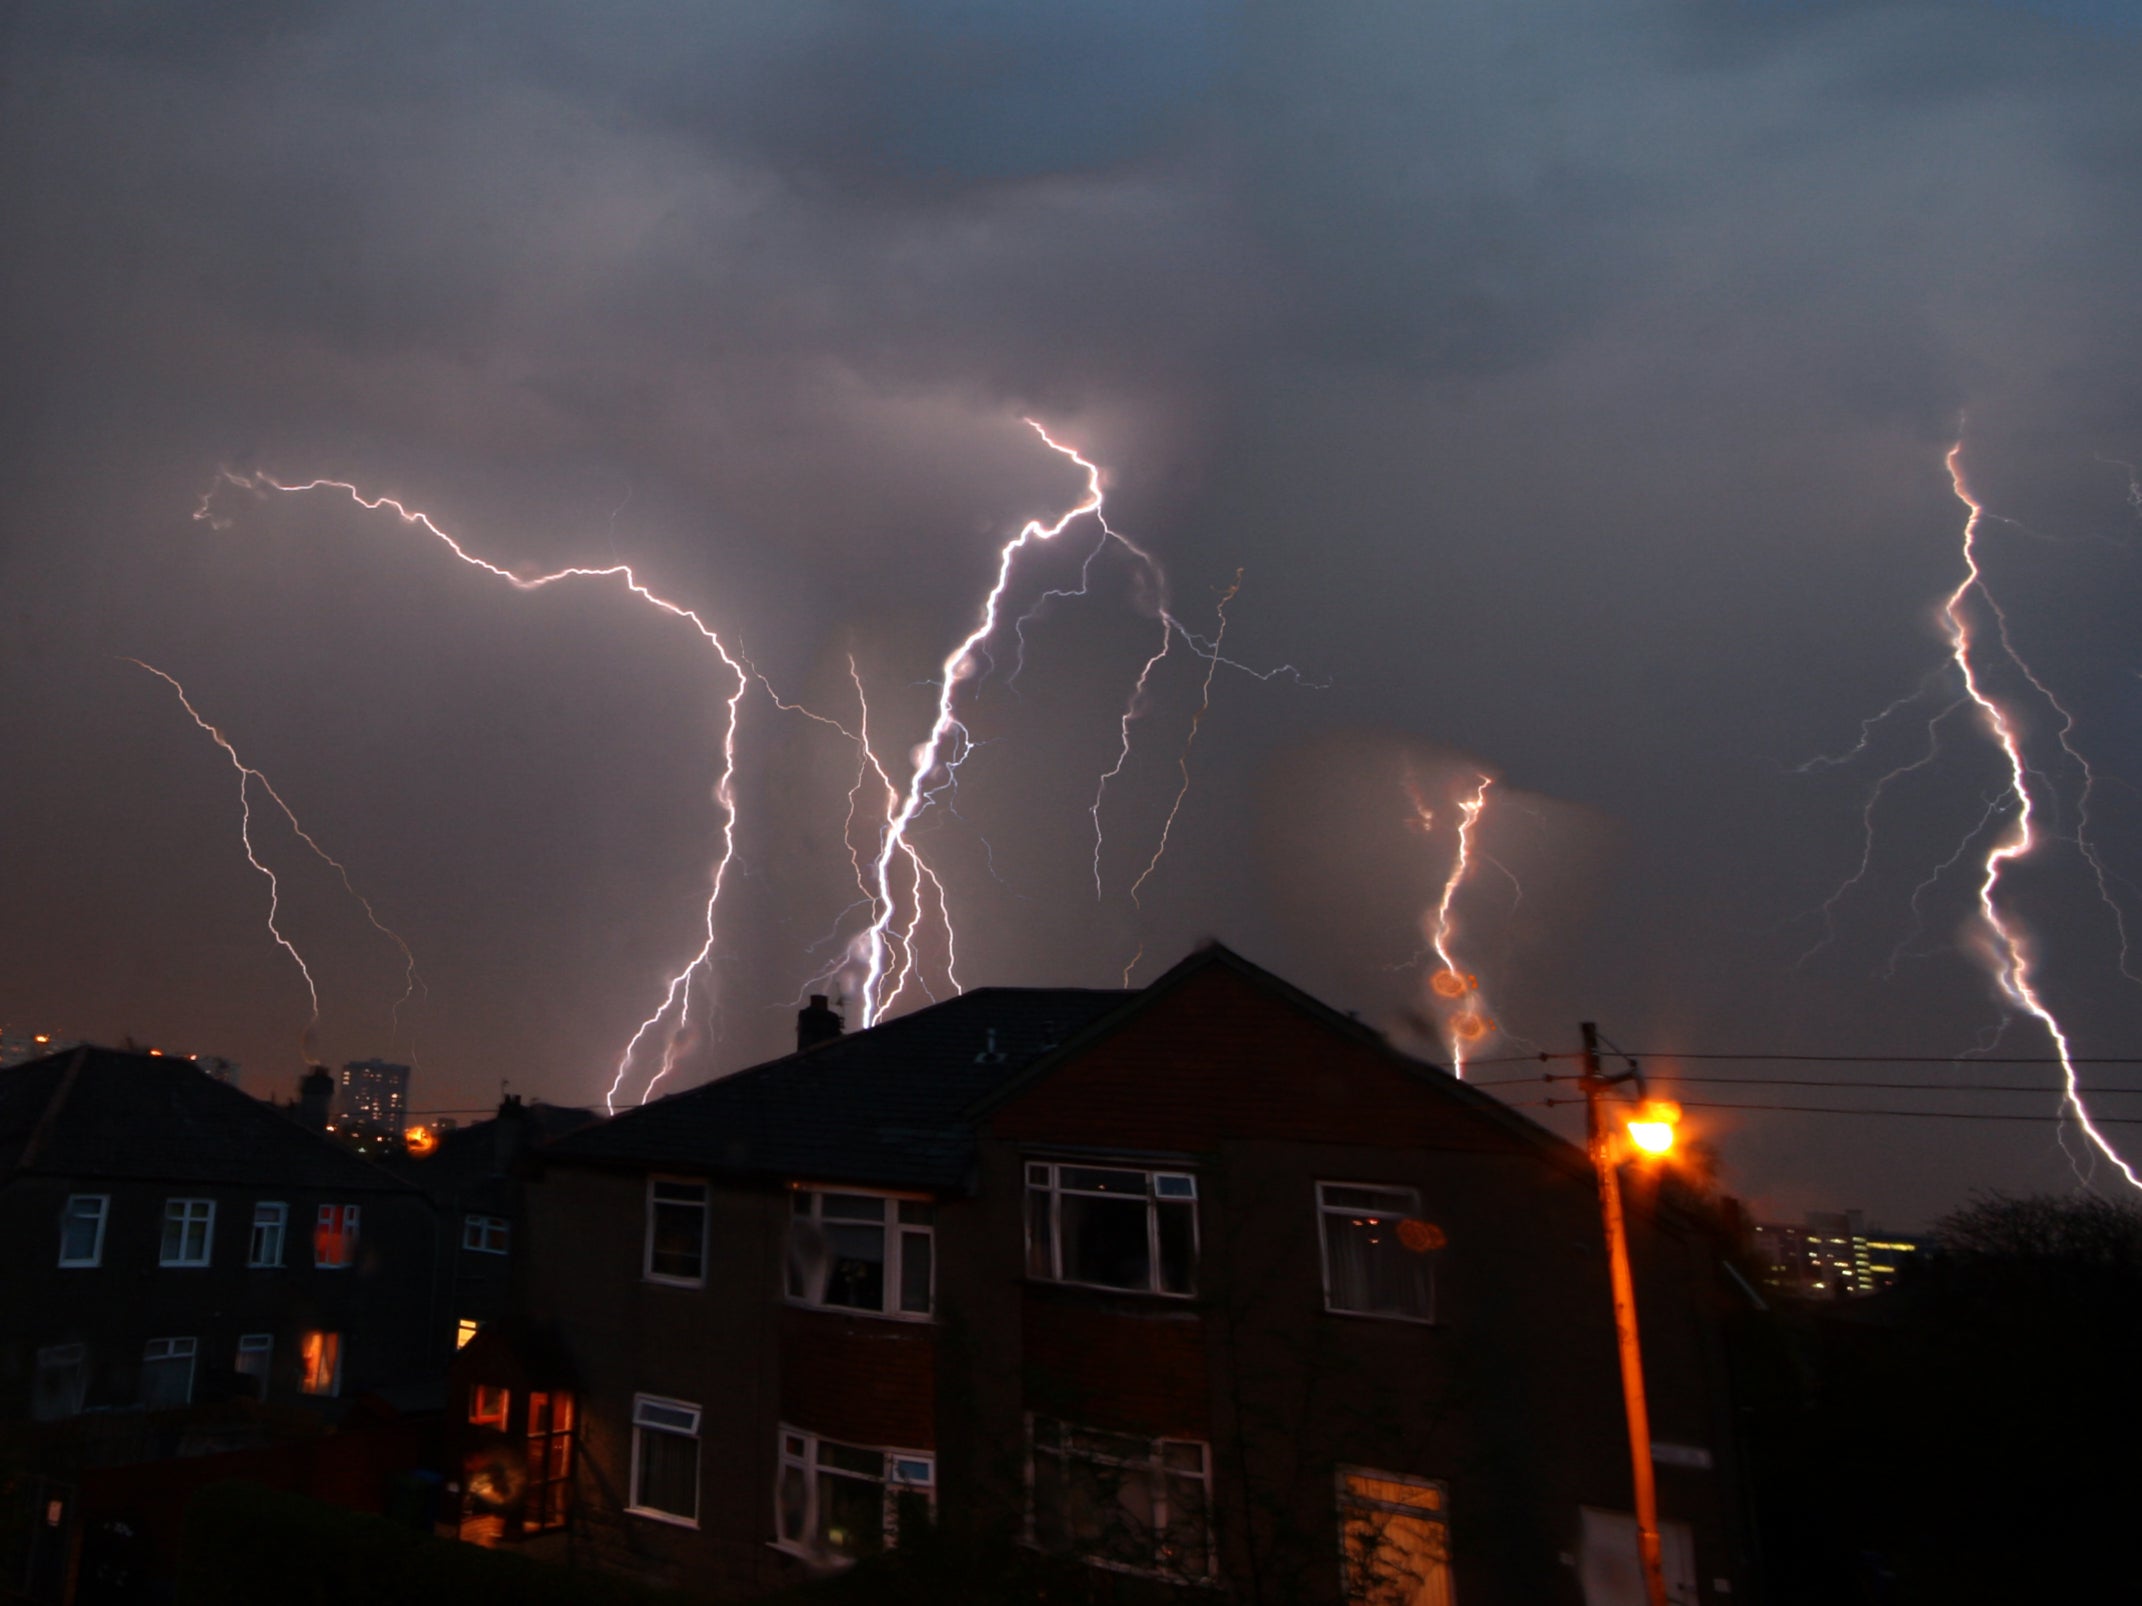 Multiple bolts of lightning flash in Glasgow during a thunderstorm